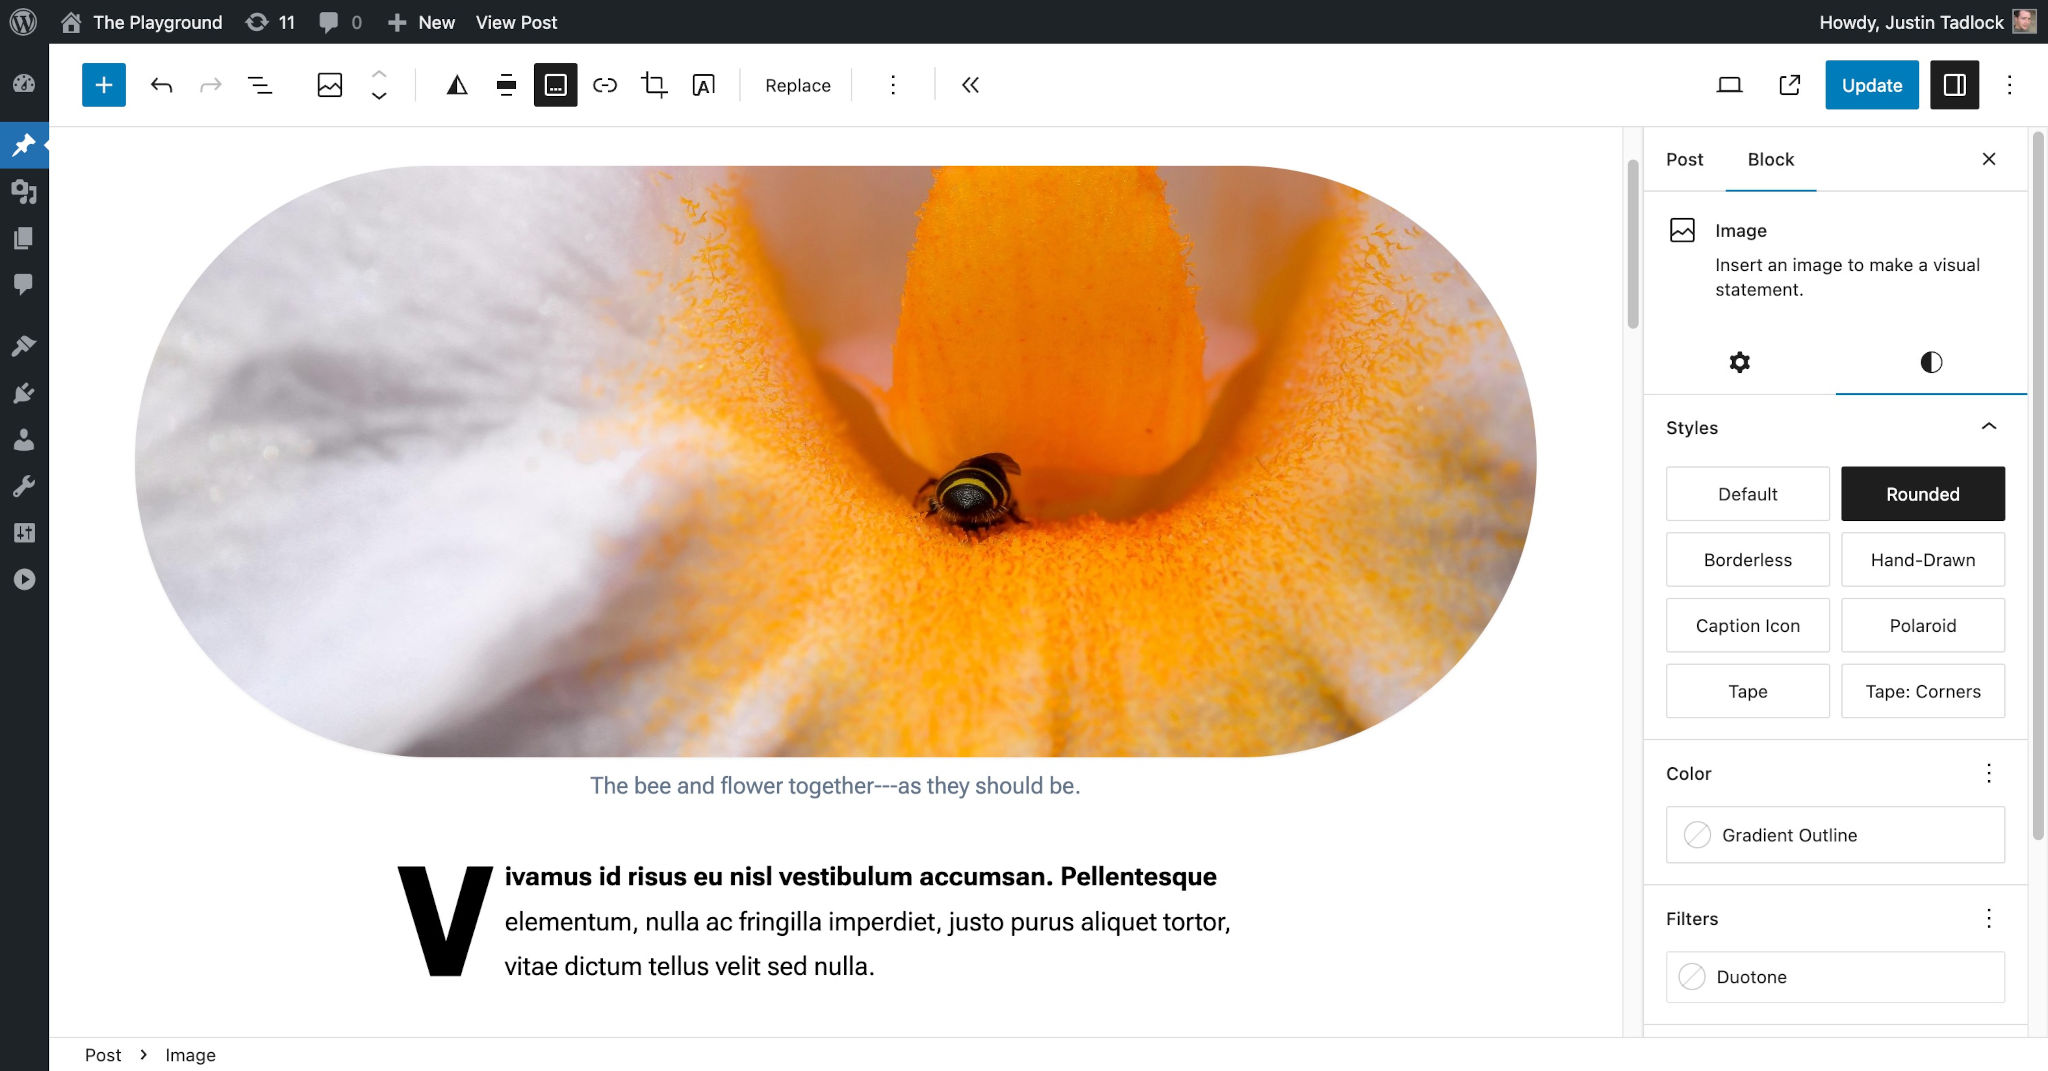 WordPress post editor showing an Image block with a rounded style in the content canvas.